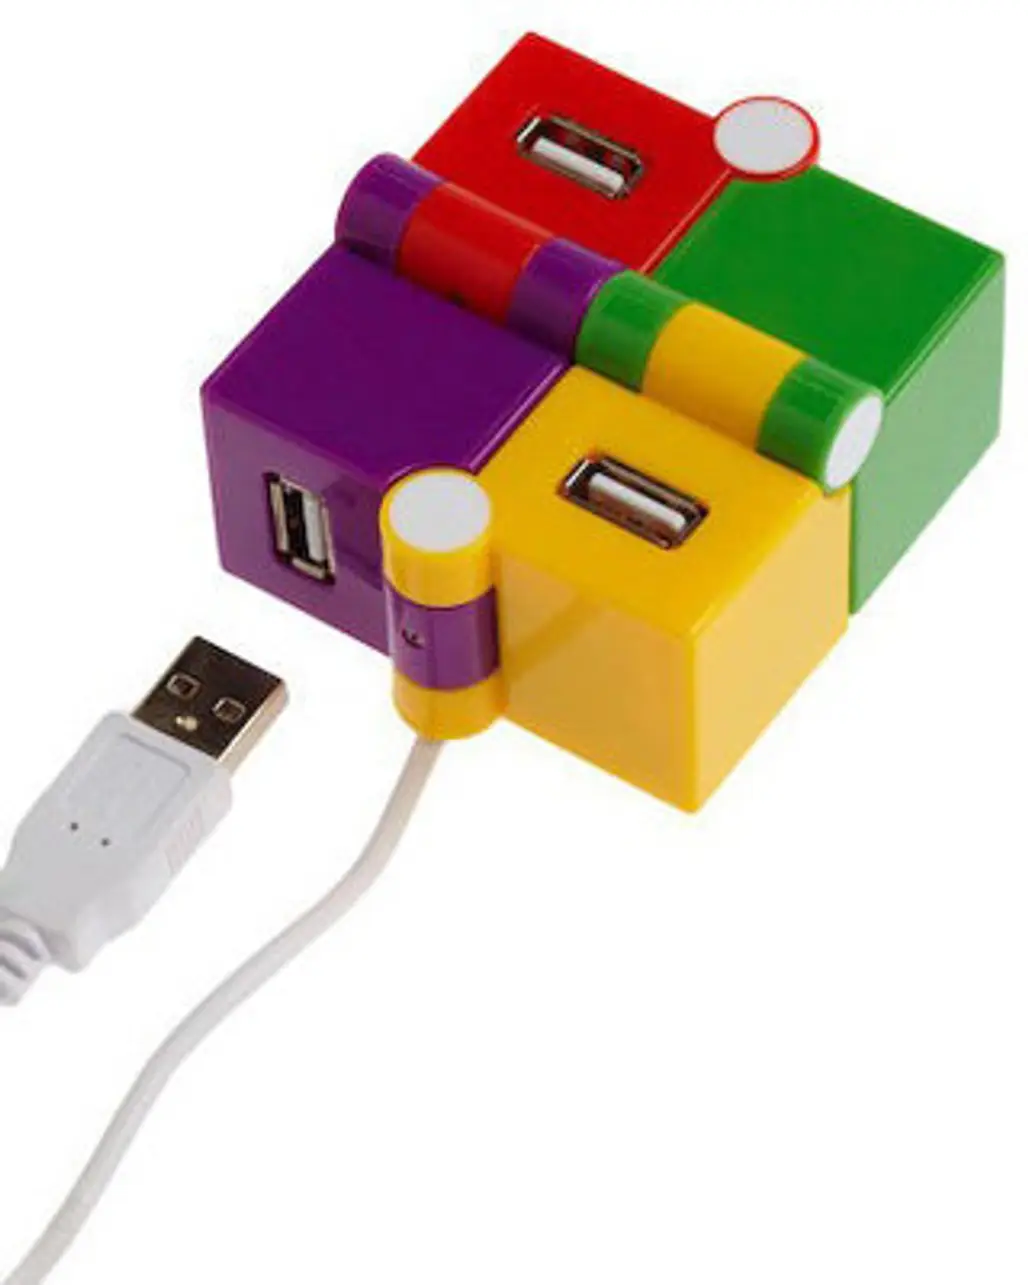 More Power to You USB Cube